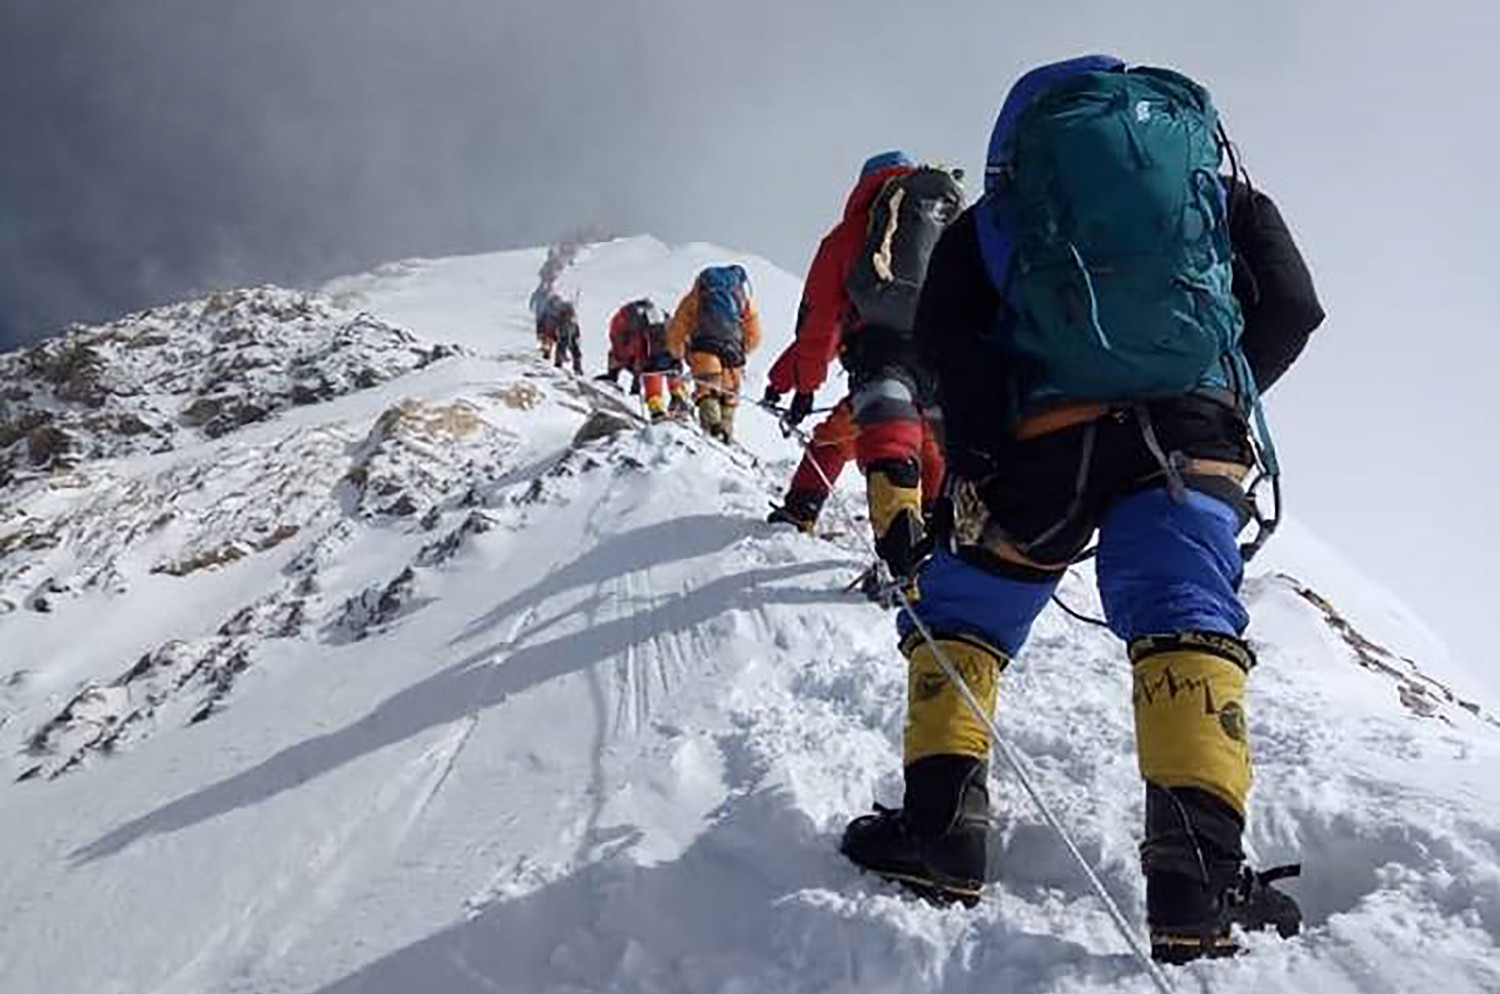 ‘Dream of Everest’ Claims life of Another Climber